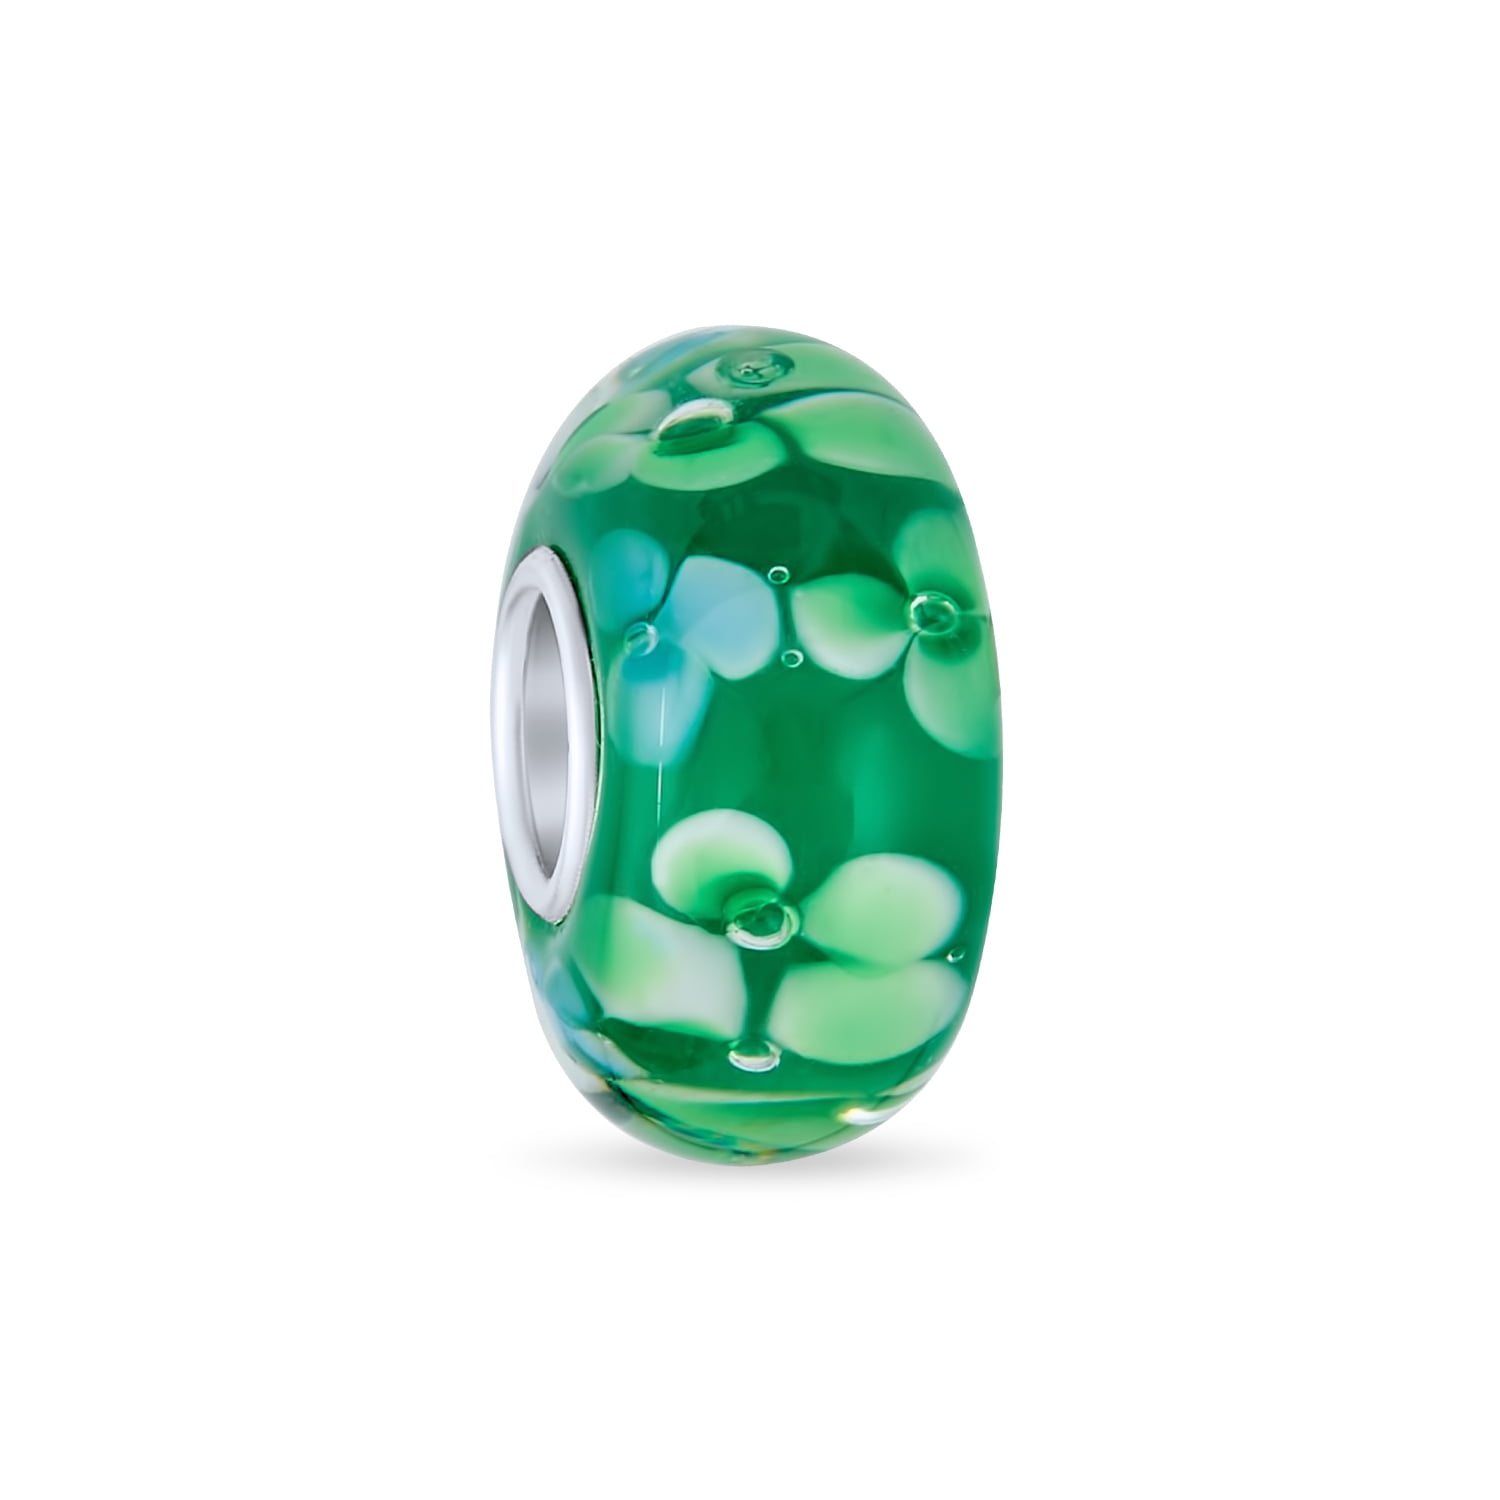 Solid 925 Sterling Silver Green with White and Green Swirls Design Glass Charm Bead for European Snake Chain Bracelets